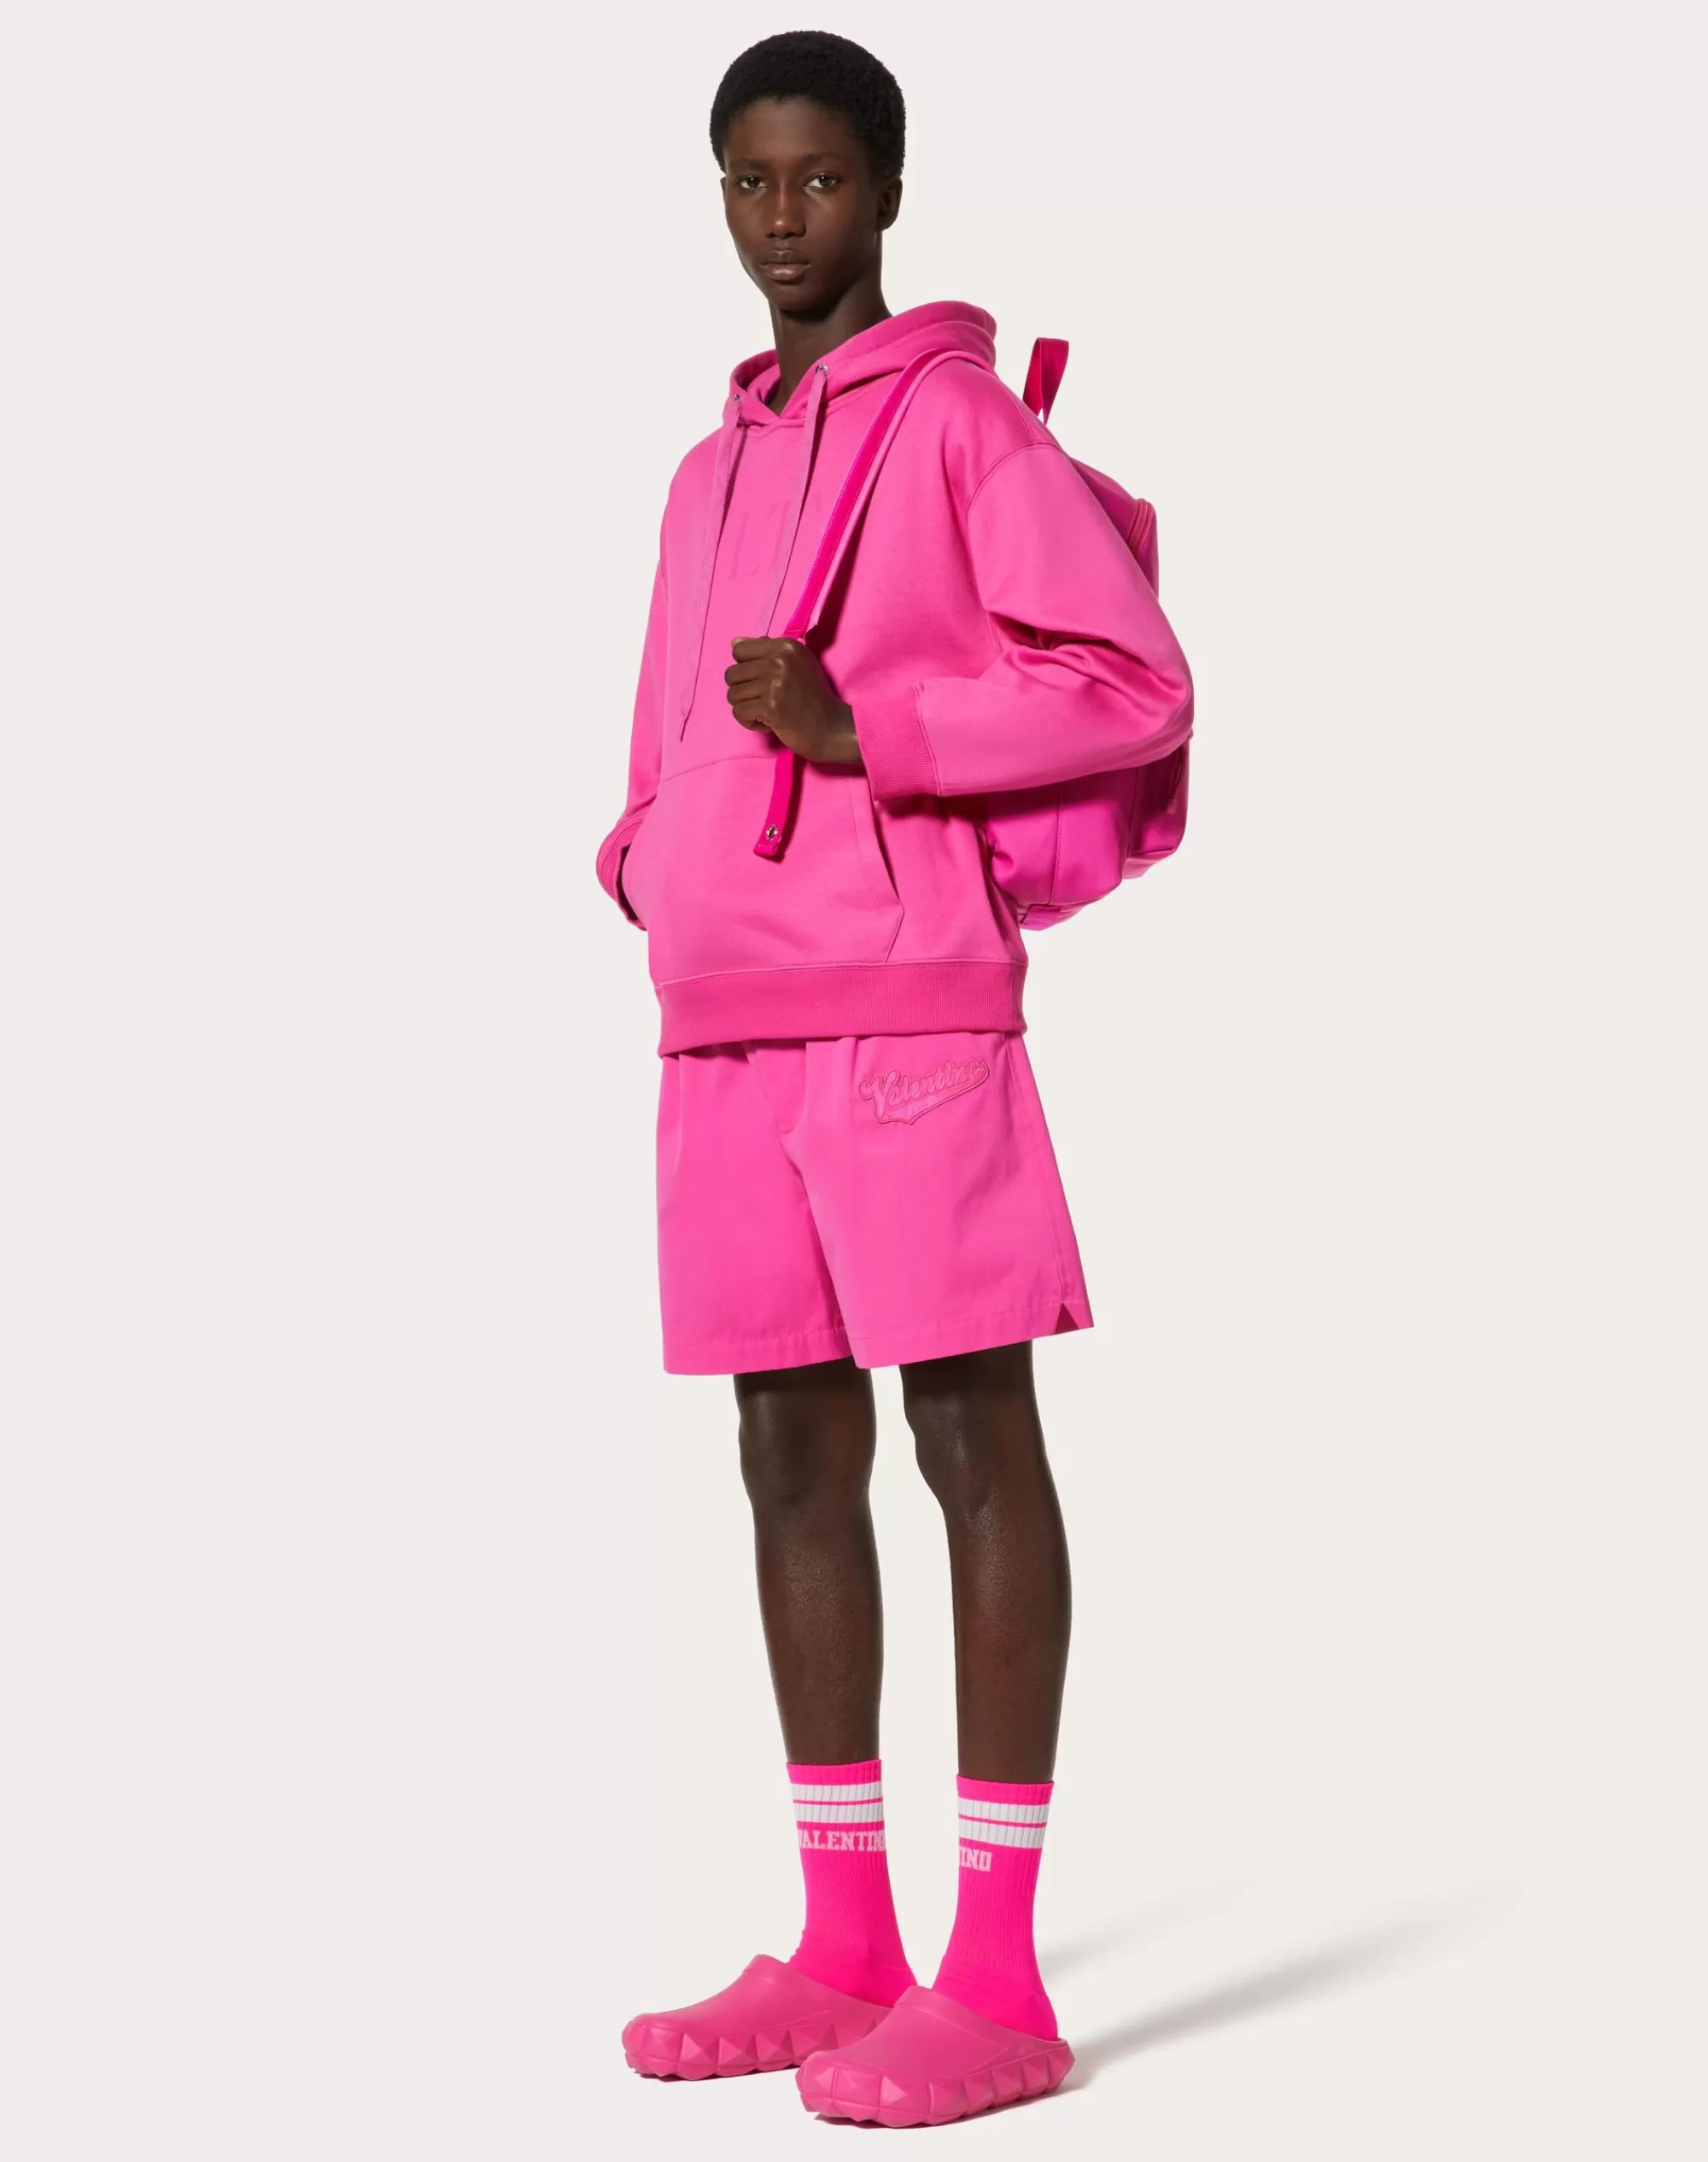 Valentino COTTON HOODED SWEATSHIRT WITH VLTN PRINT PinkPp Outlet